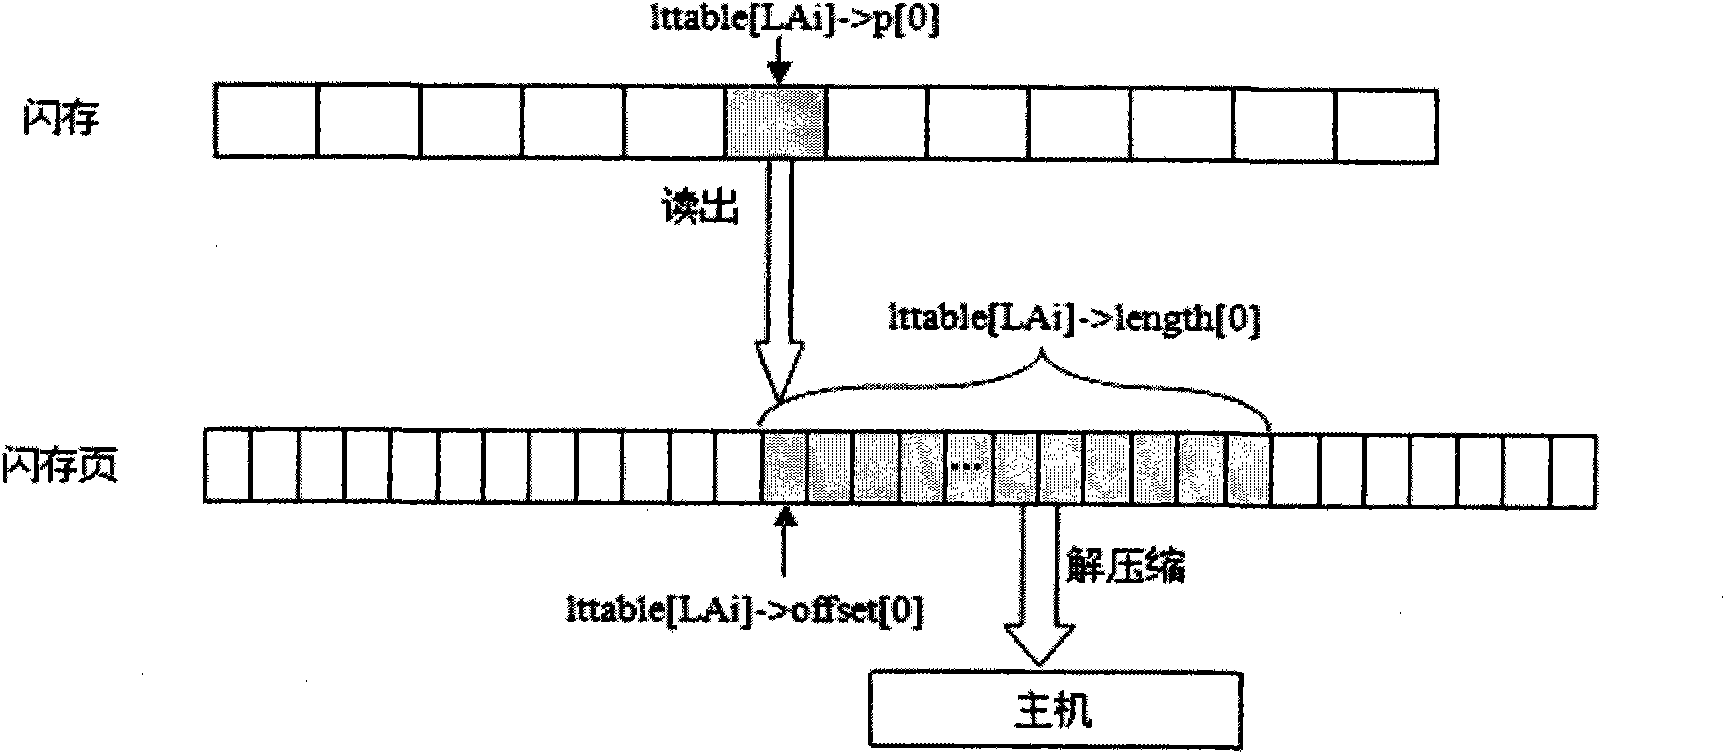 Flash translation layer (FTL) with data compression function and implementation method